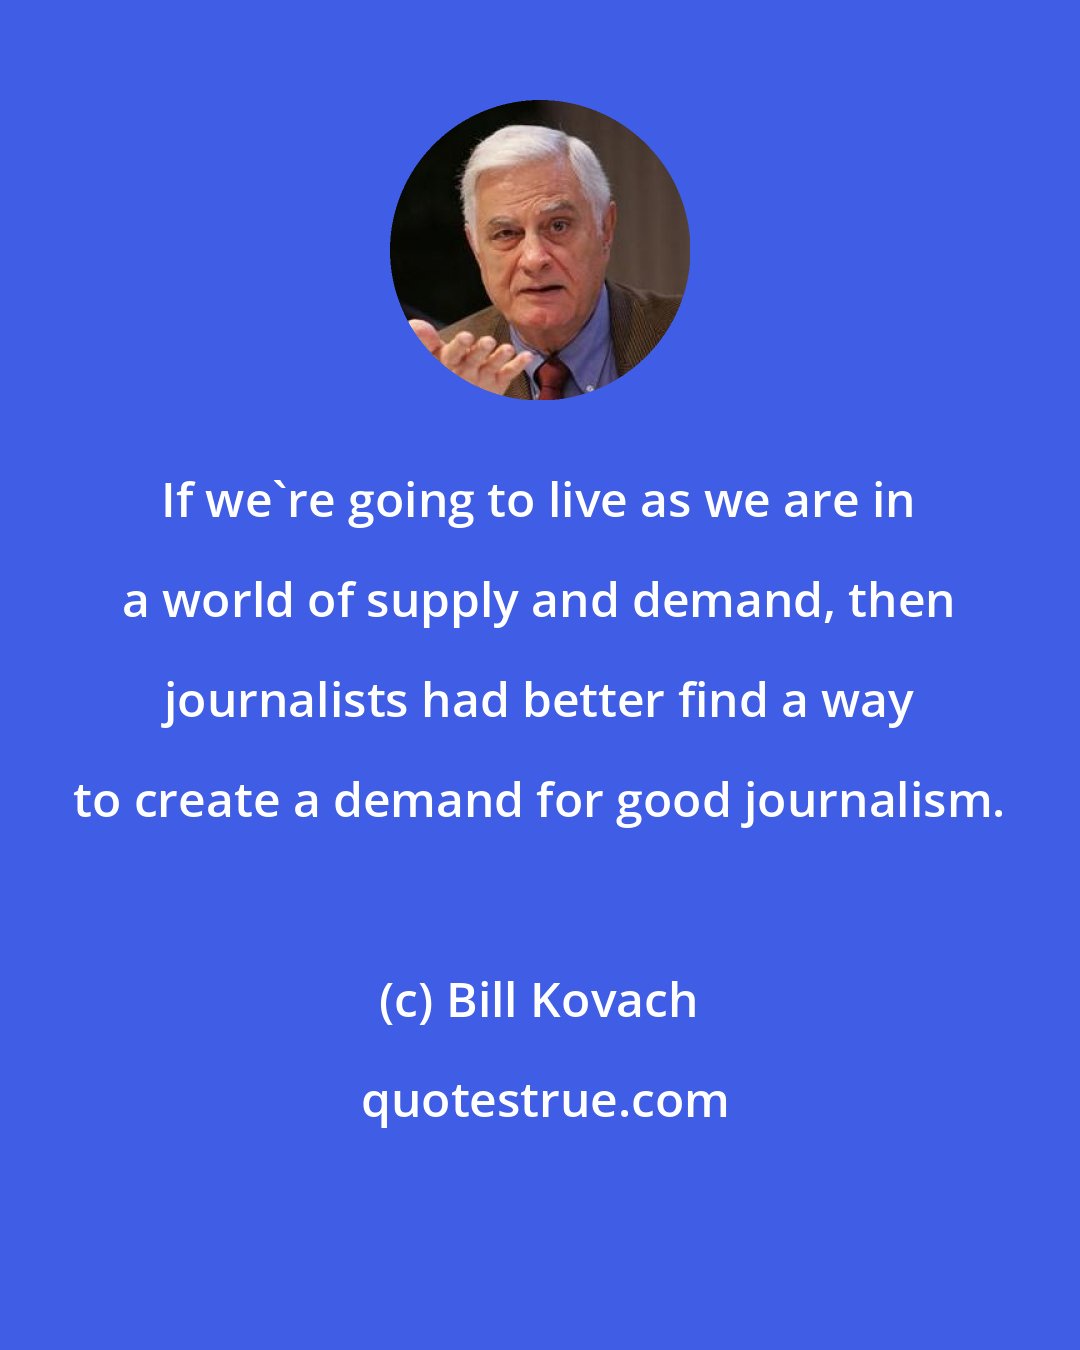 Bill Kovach: If we're going to live as we are in a world of supply and demand, then journalists had better find a way to create a demand for good journalism.